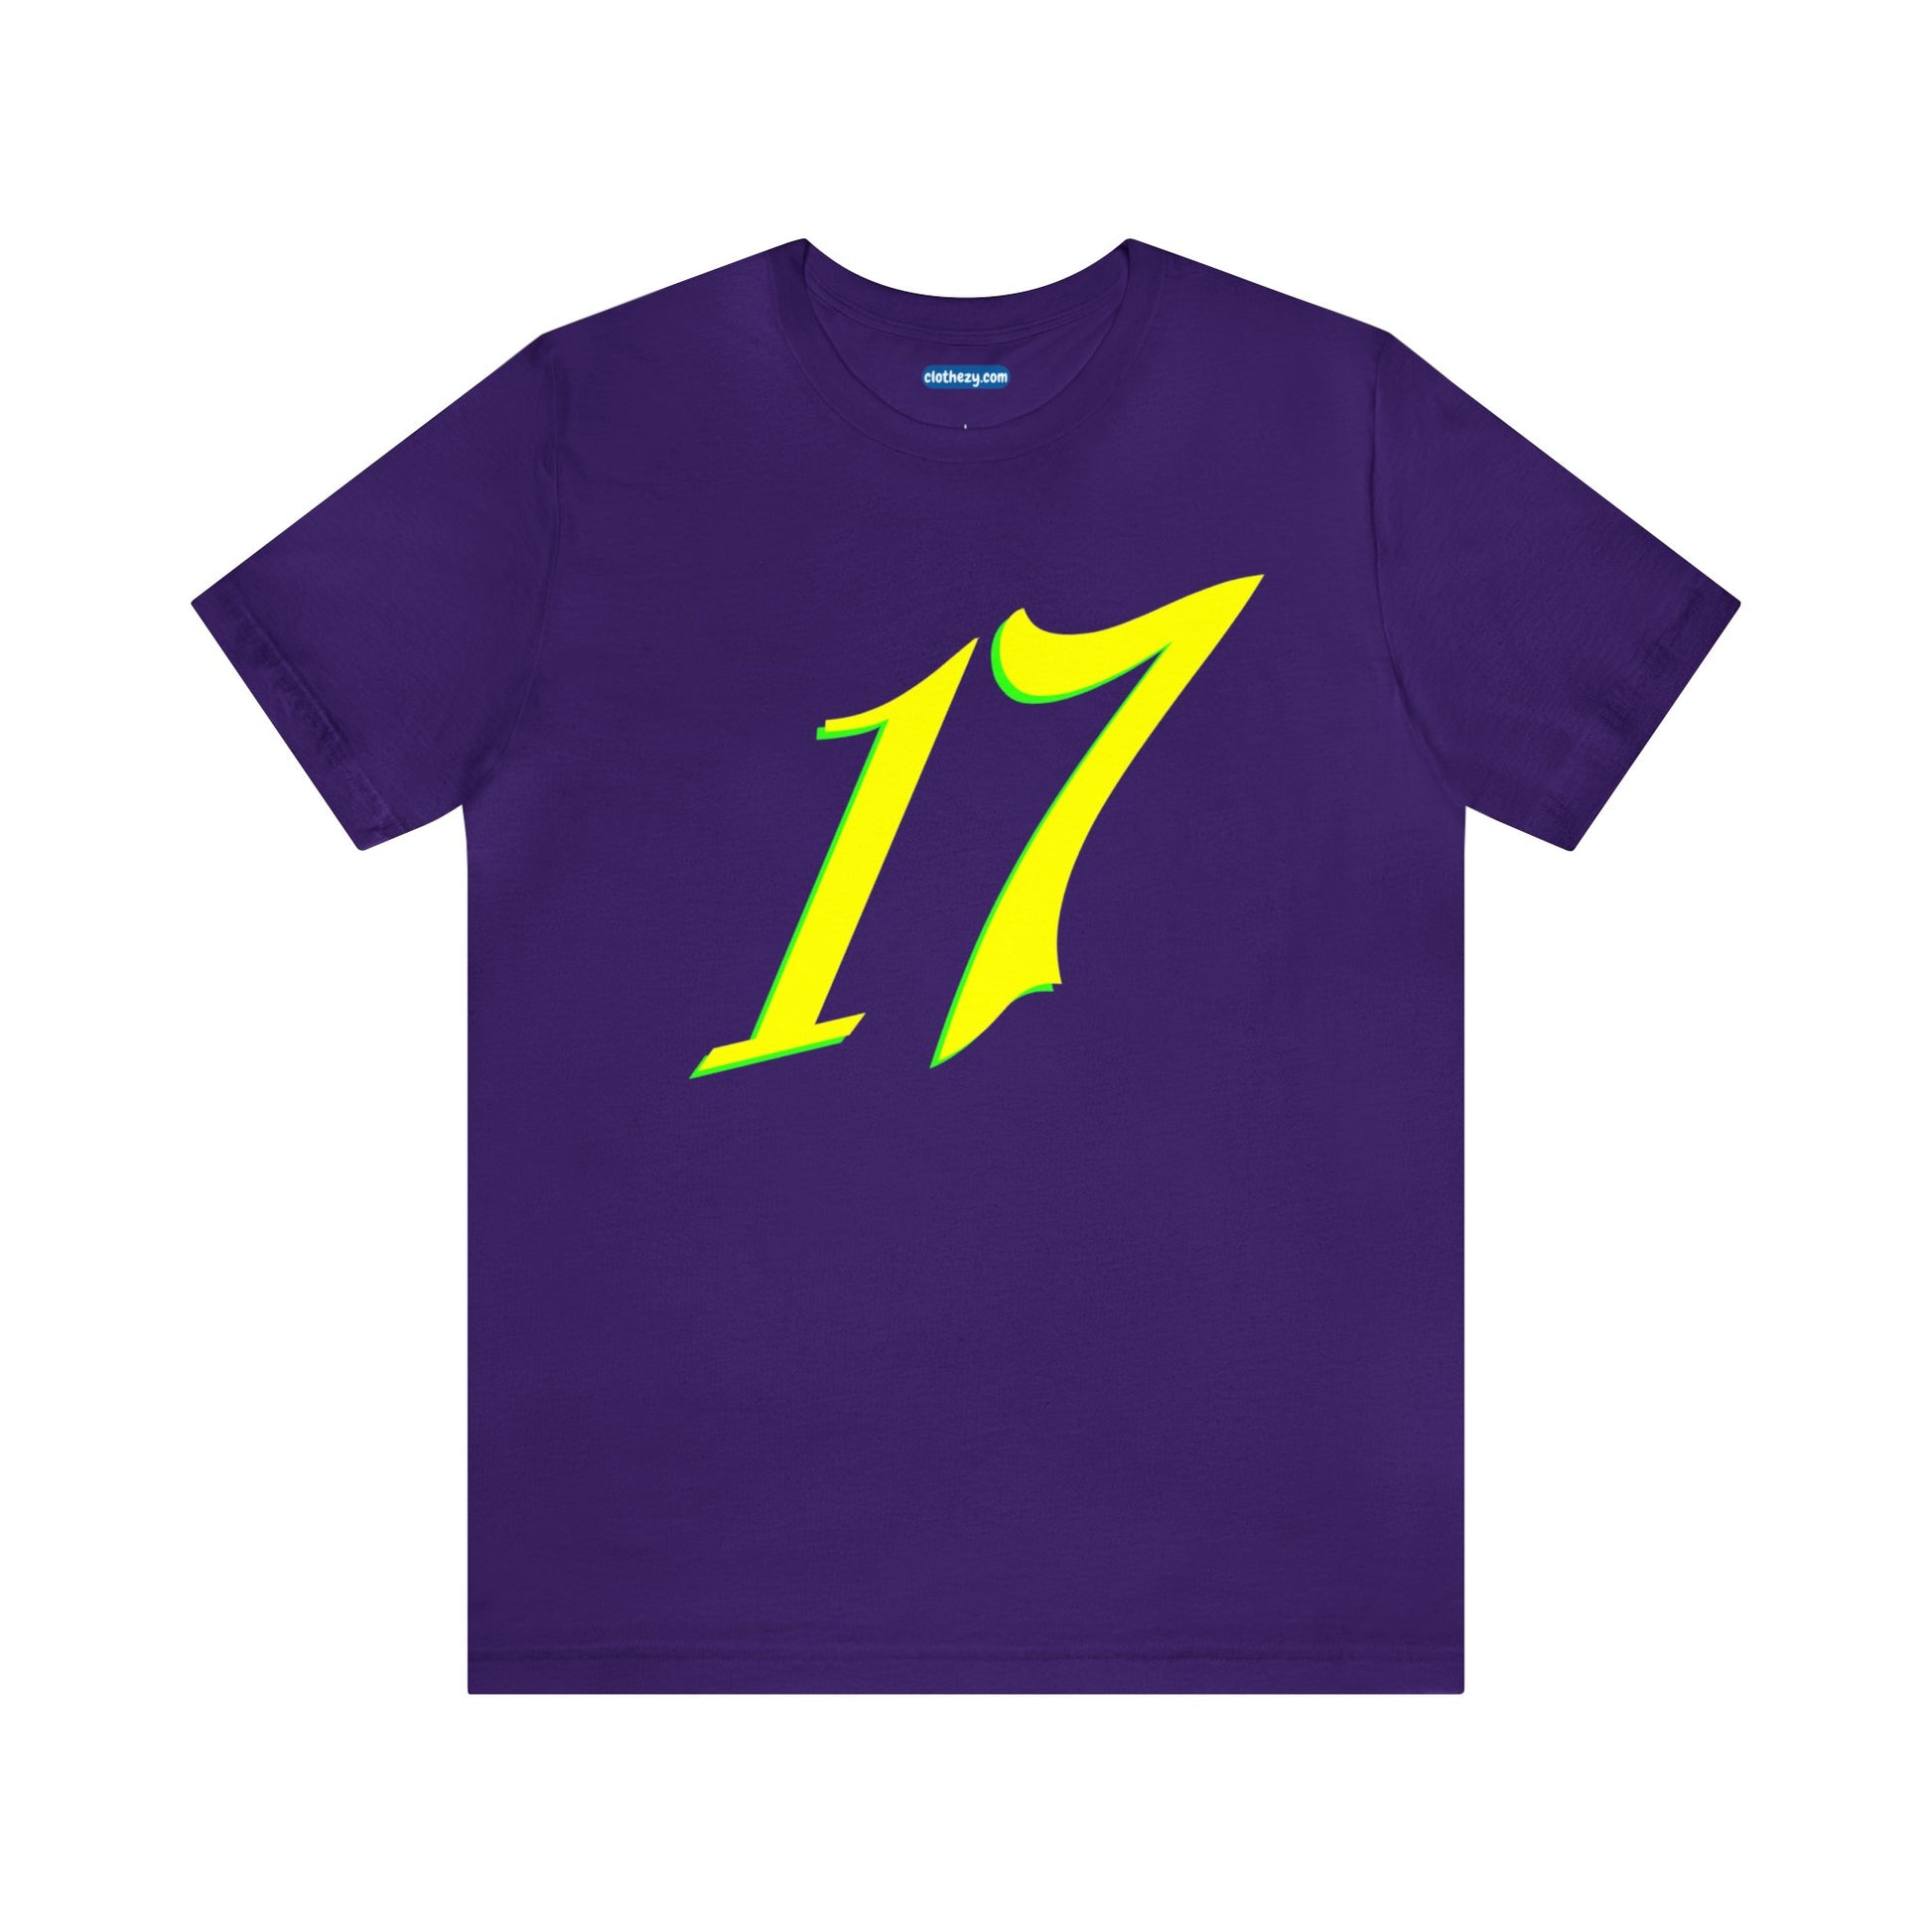 Number 17 Design - Soft Cotton Tee for birthdays and celebrations, Gift for friends and family, Multiple Options by clothezy.com in Royal Blue Size Small - Buy Now